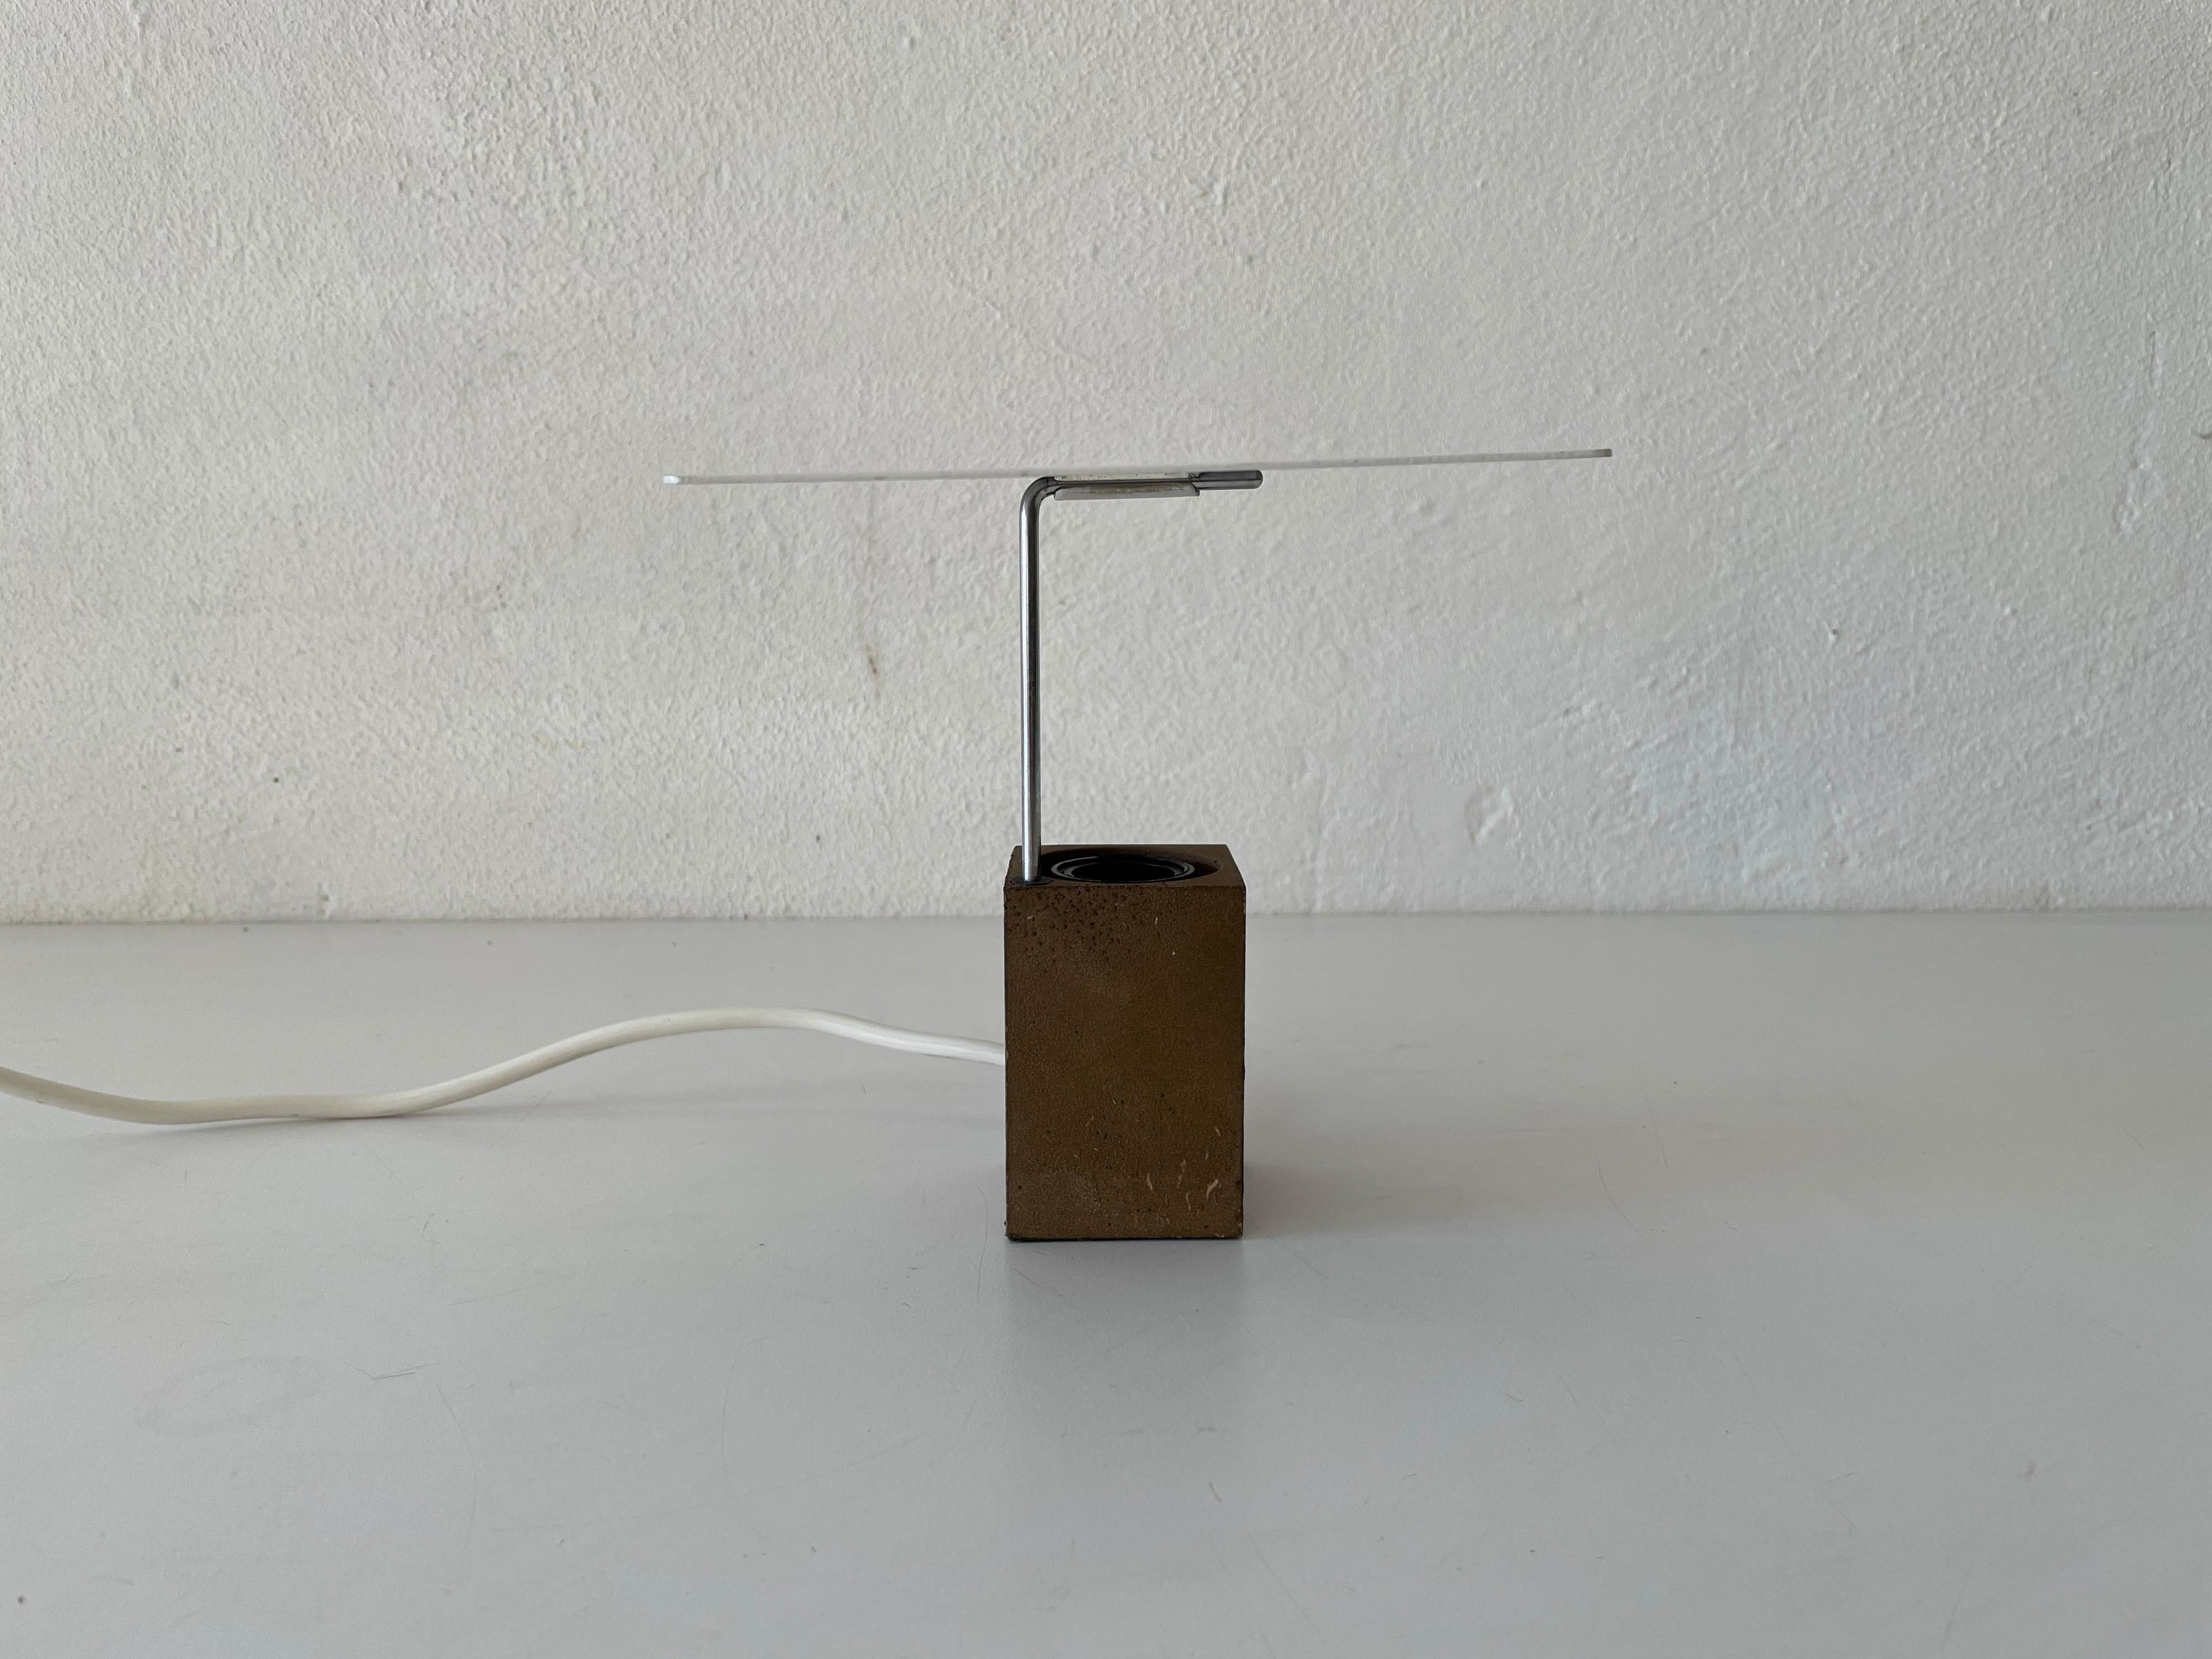 Table lamp model 610 by Antonio Pio Macchi Cassia for Arteluce, 1970s Italy

Metal shade and brown stone base

Minimal and natural design with cocoon material
Very high quality.
Fully functional.


Original cable and plug. This lamp is